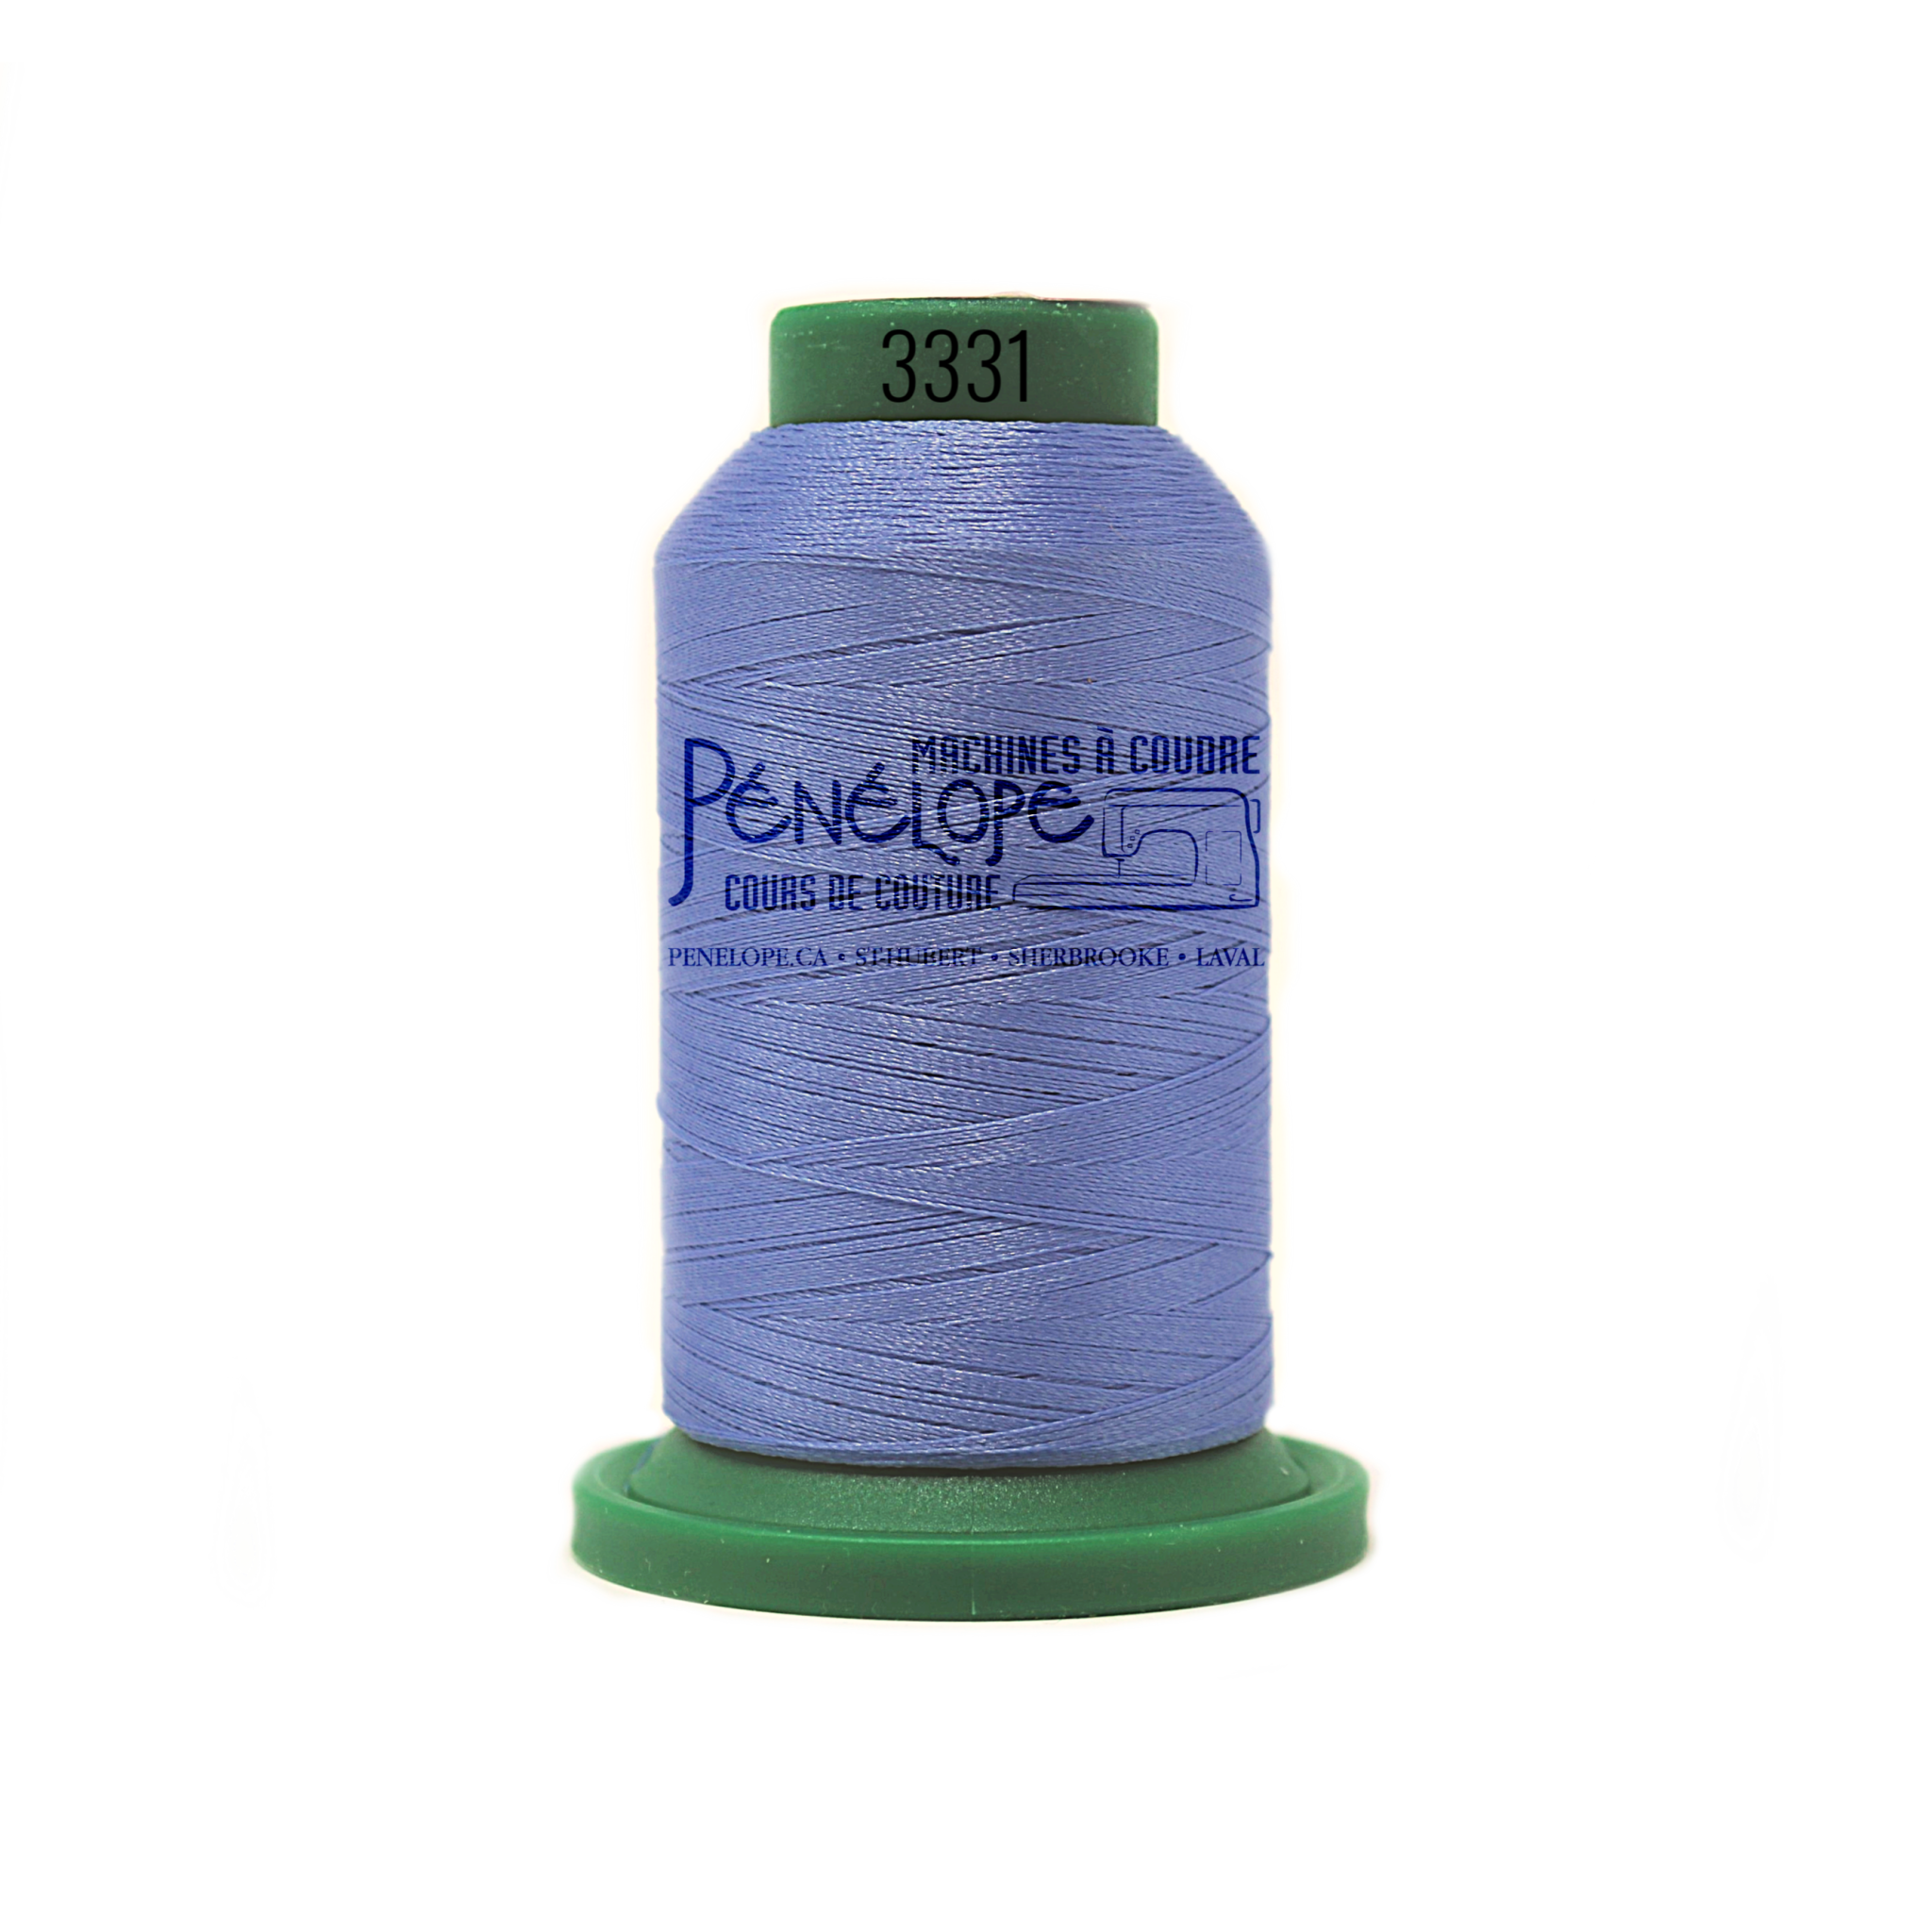 Isacord Isacord sewing and embroidery thread 3331